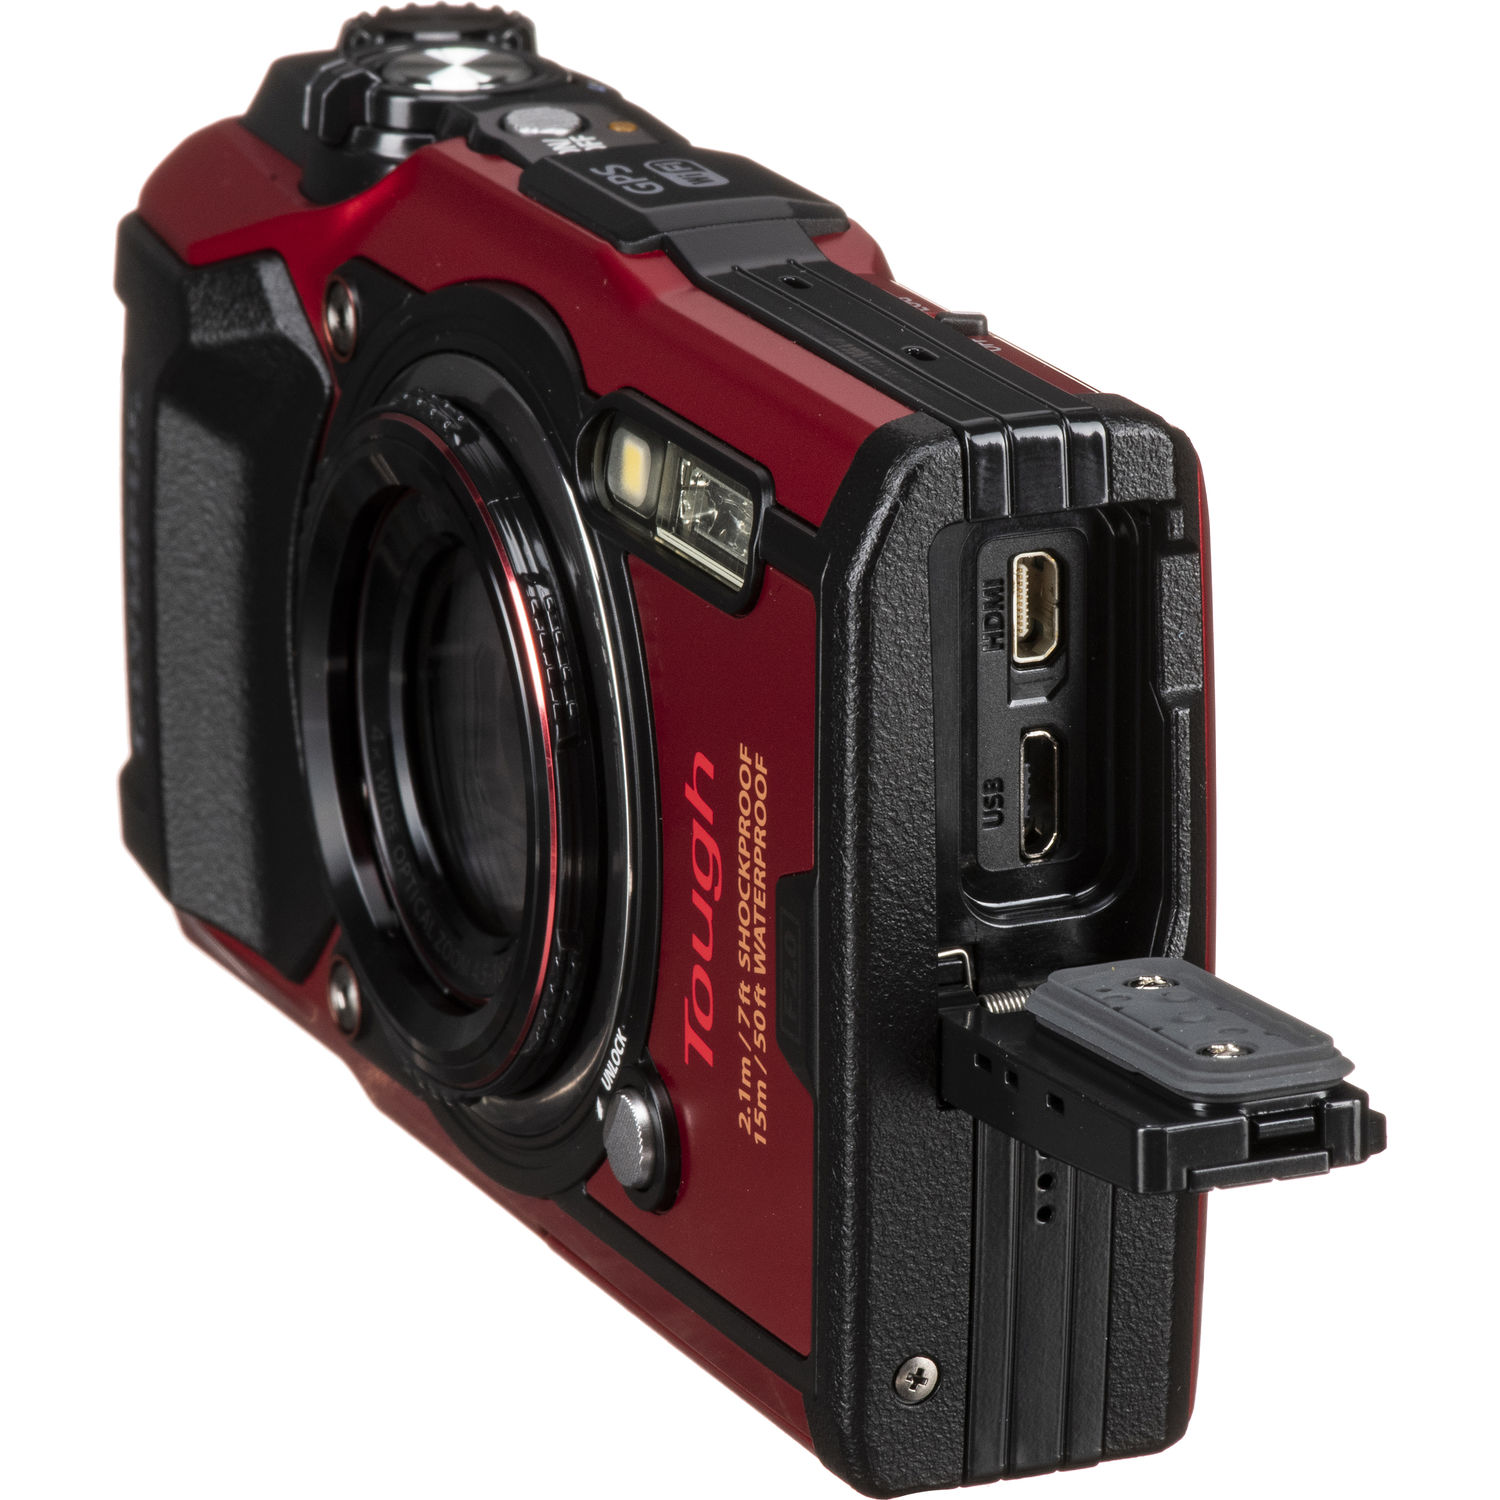 Olympus Tough TG-6 Compact Camera - Red - image 3 of 5